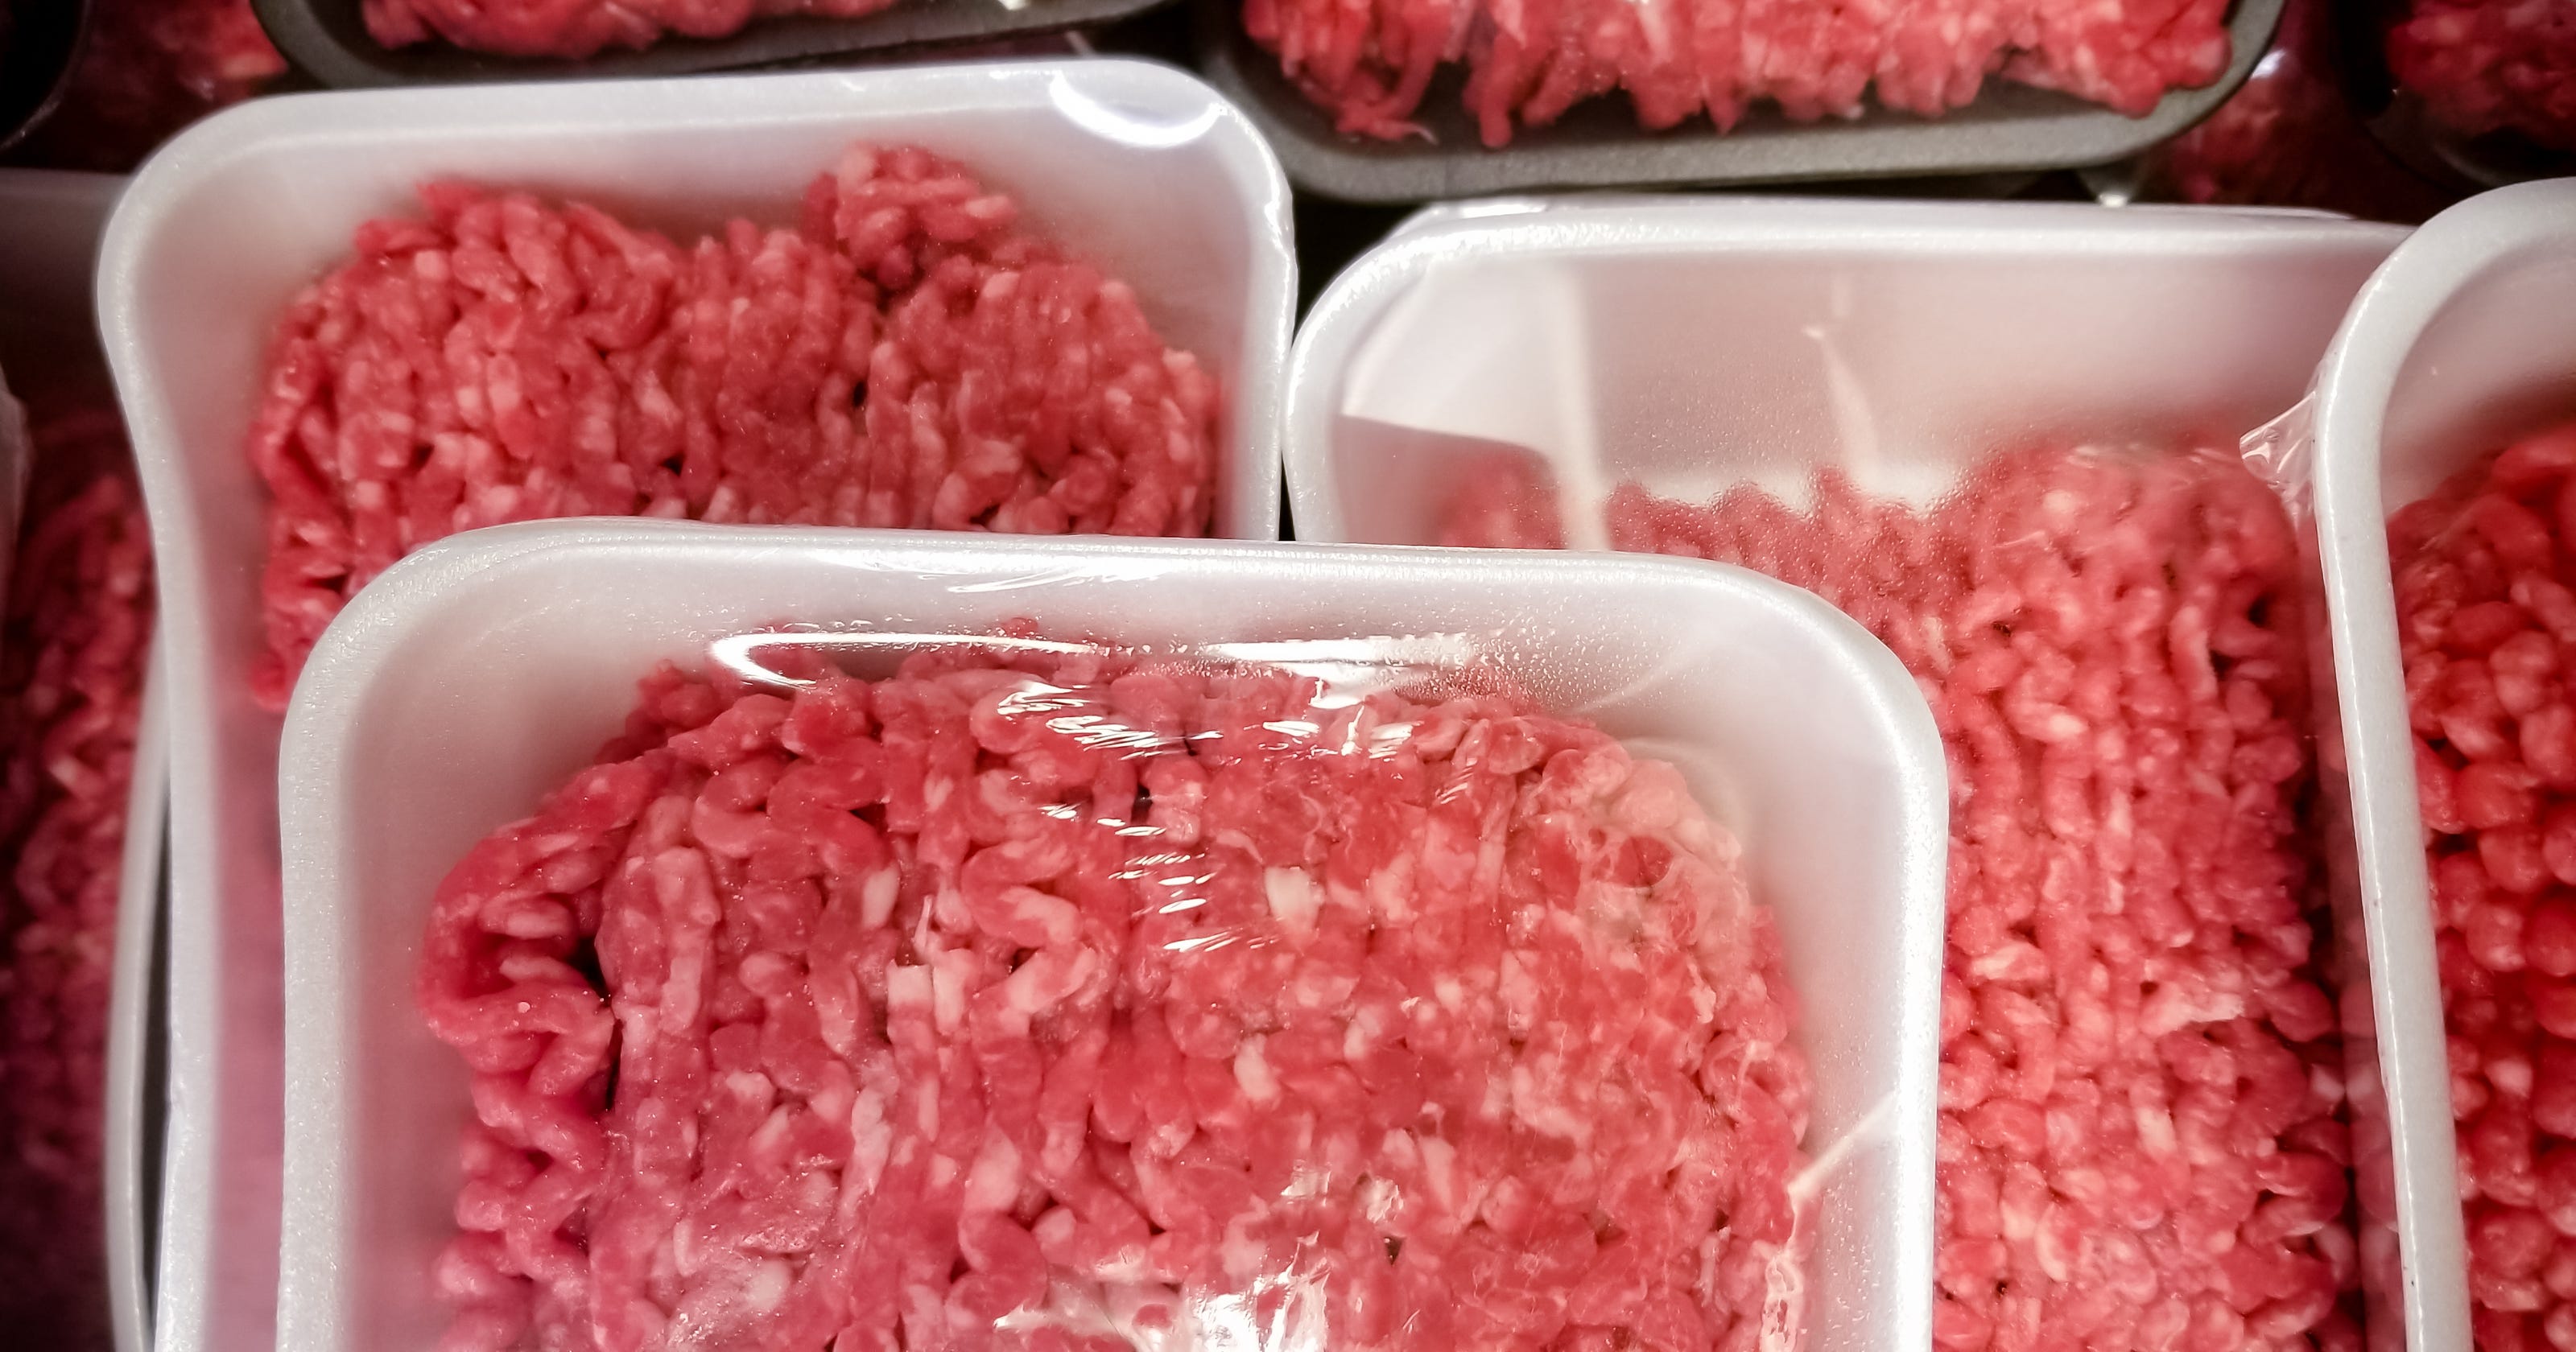 Raw beef recall More than 62K pounds recalled because of E. coli risk